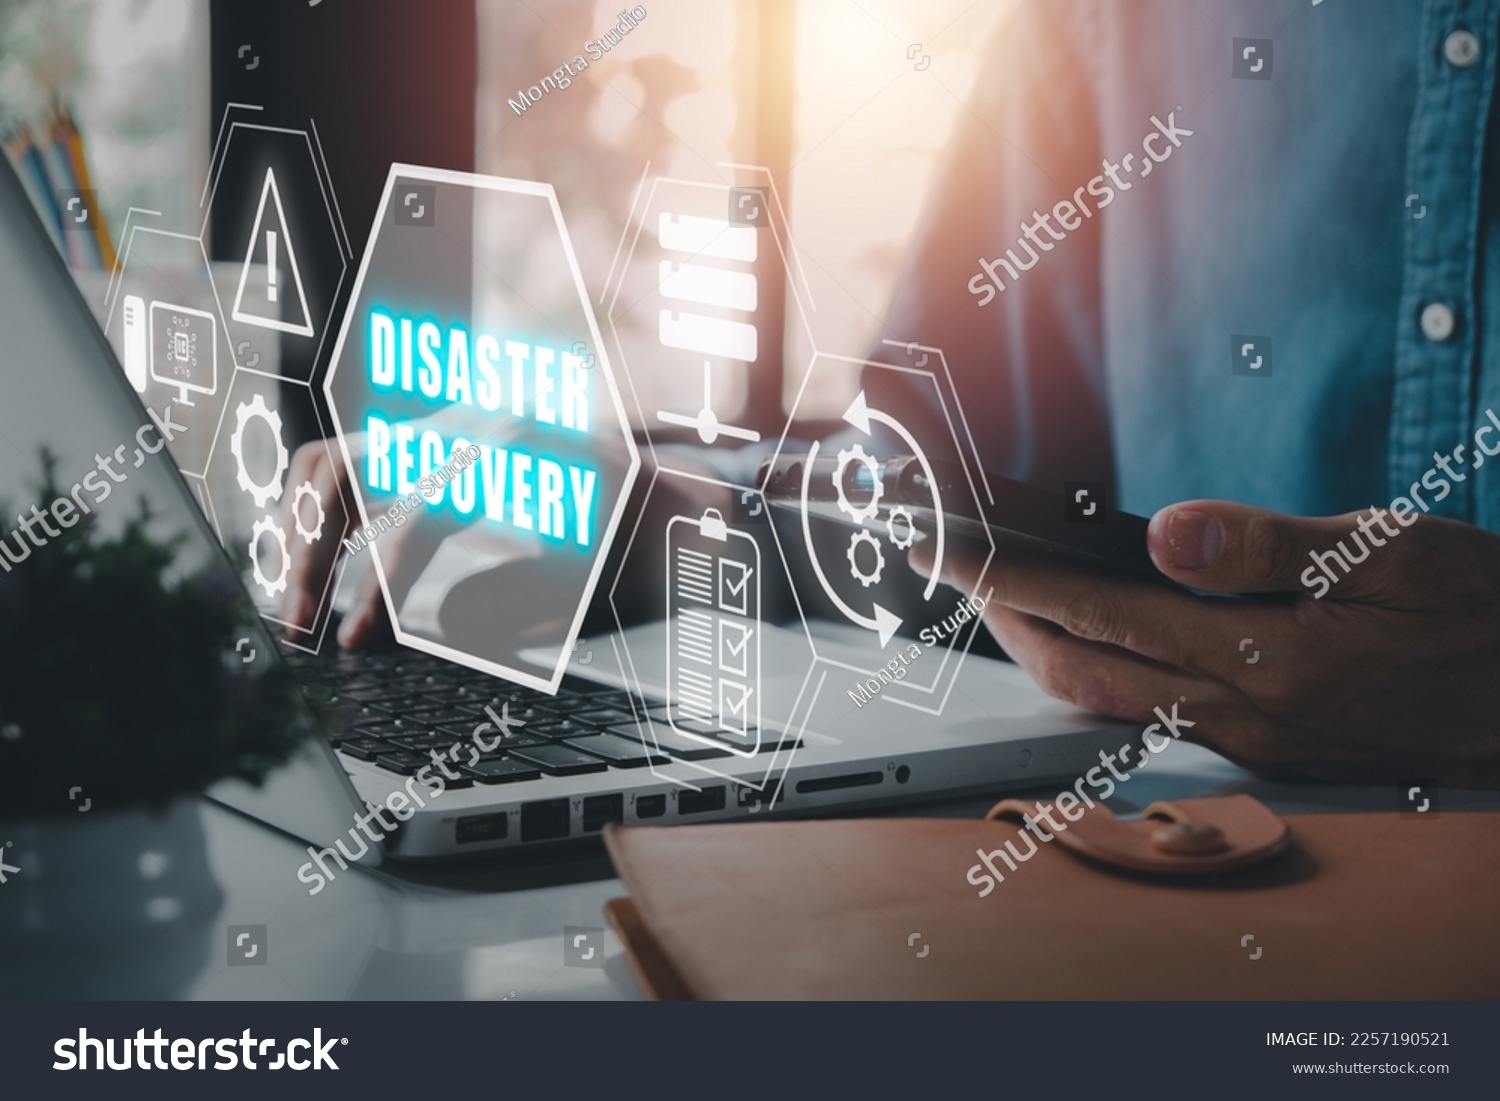 Disaster Recovery concept, Person hand using laptop computer with Disaster Recovery icon on virtual screen. #2257190521